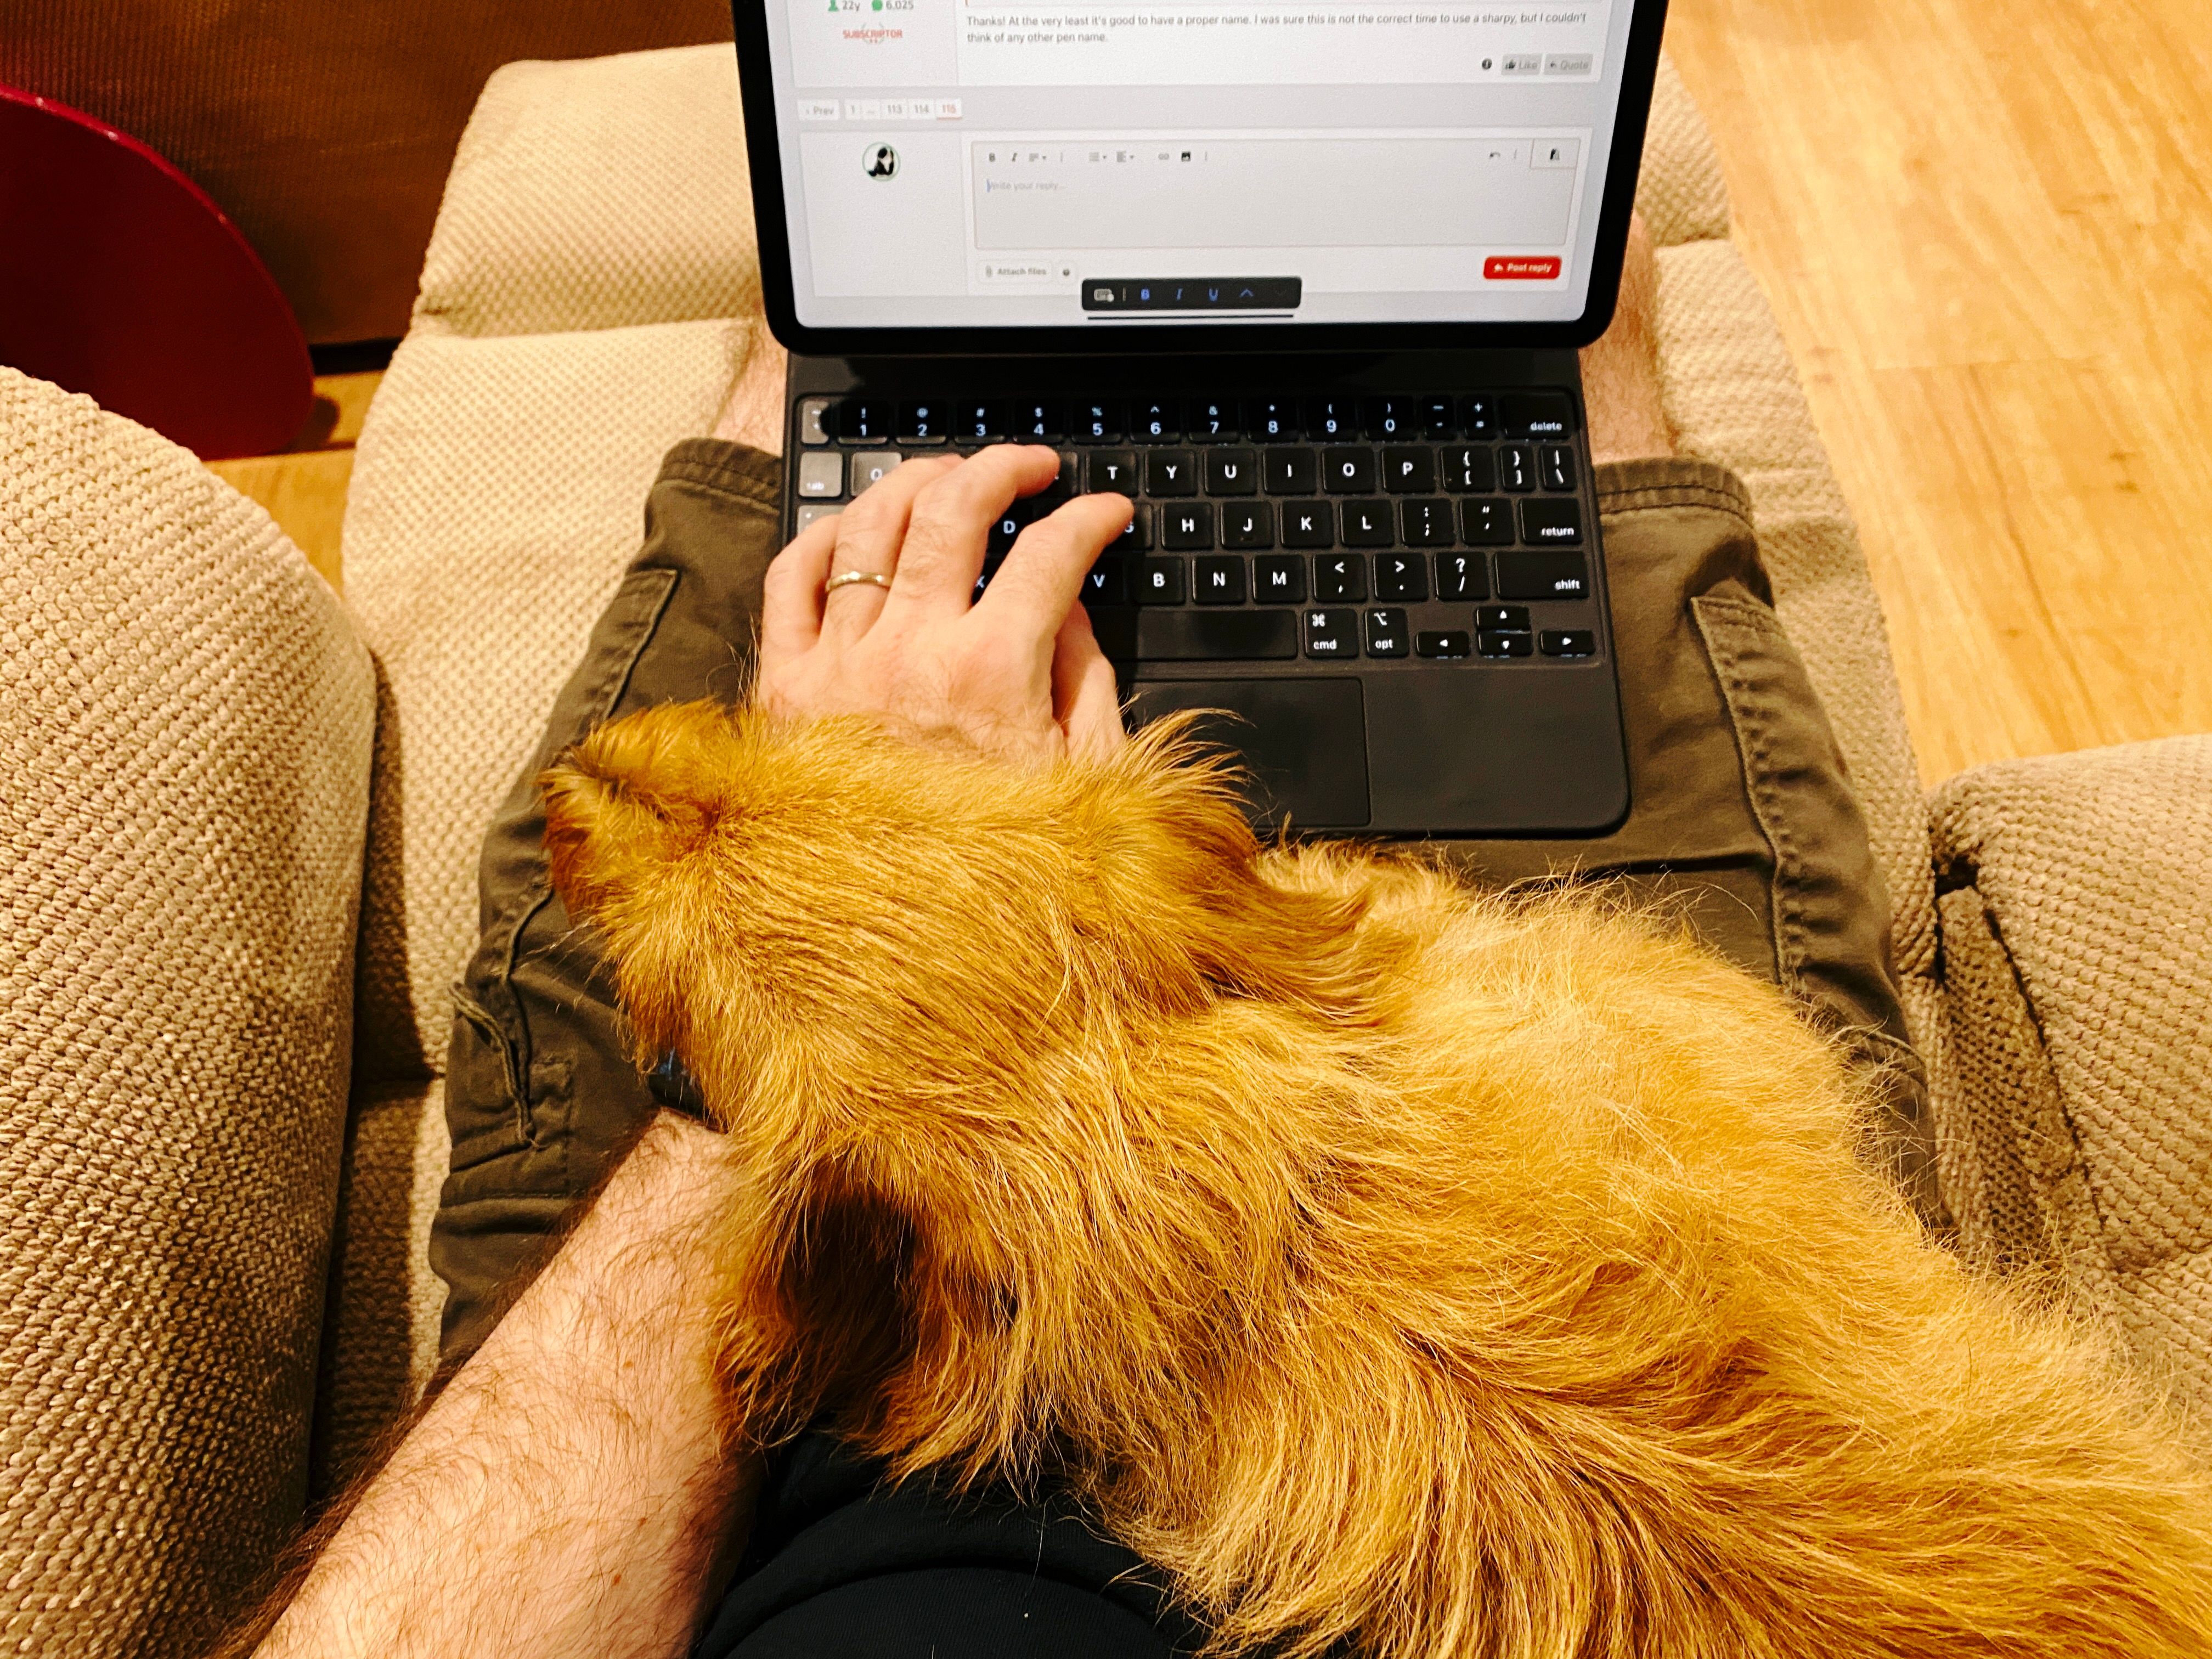 A photo taken from my perspective looking down at my lap. My iPad and Magic Keyboard are on my lap, my left hand is on the keyboard, and there's a small scruffy blonde dog lying across my lap with his head on my left wrist.